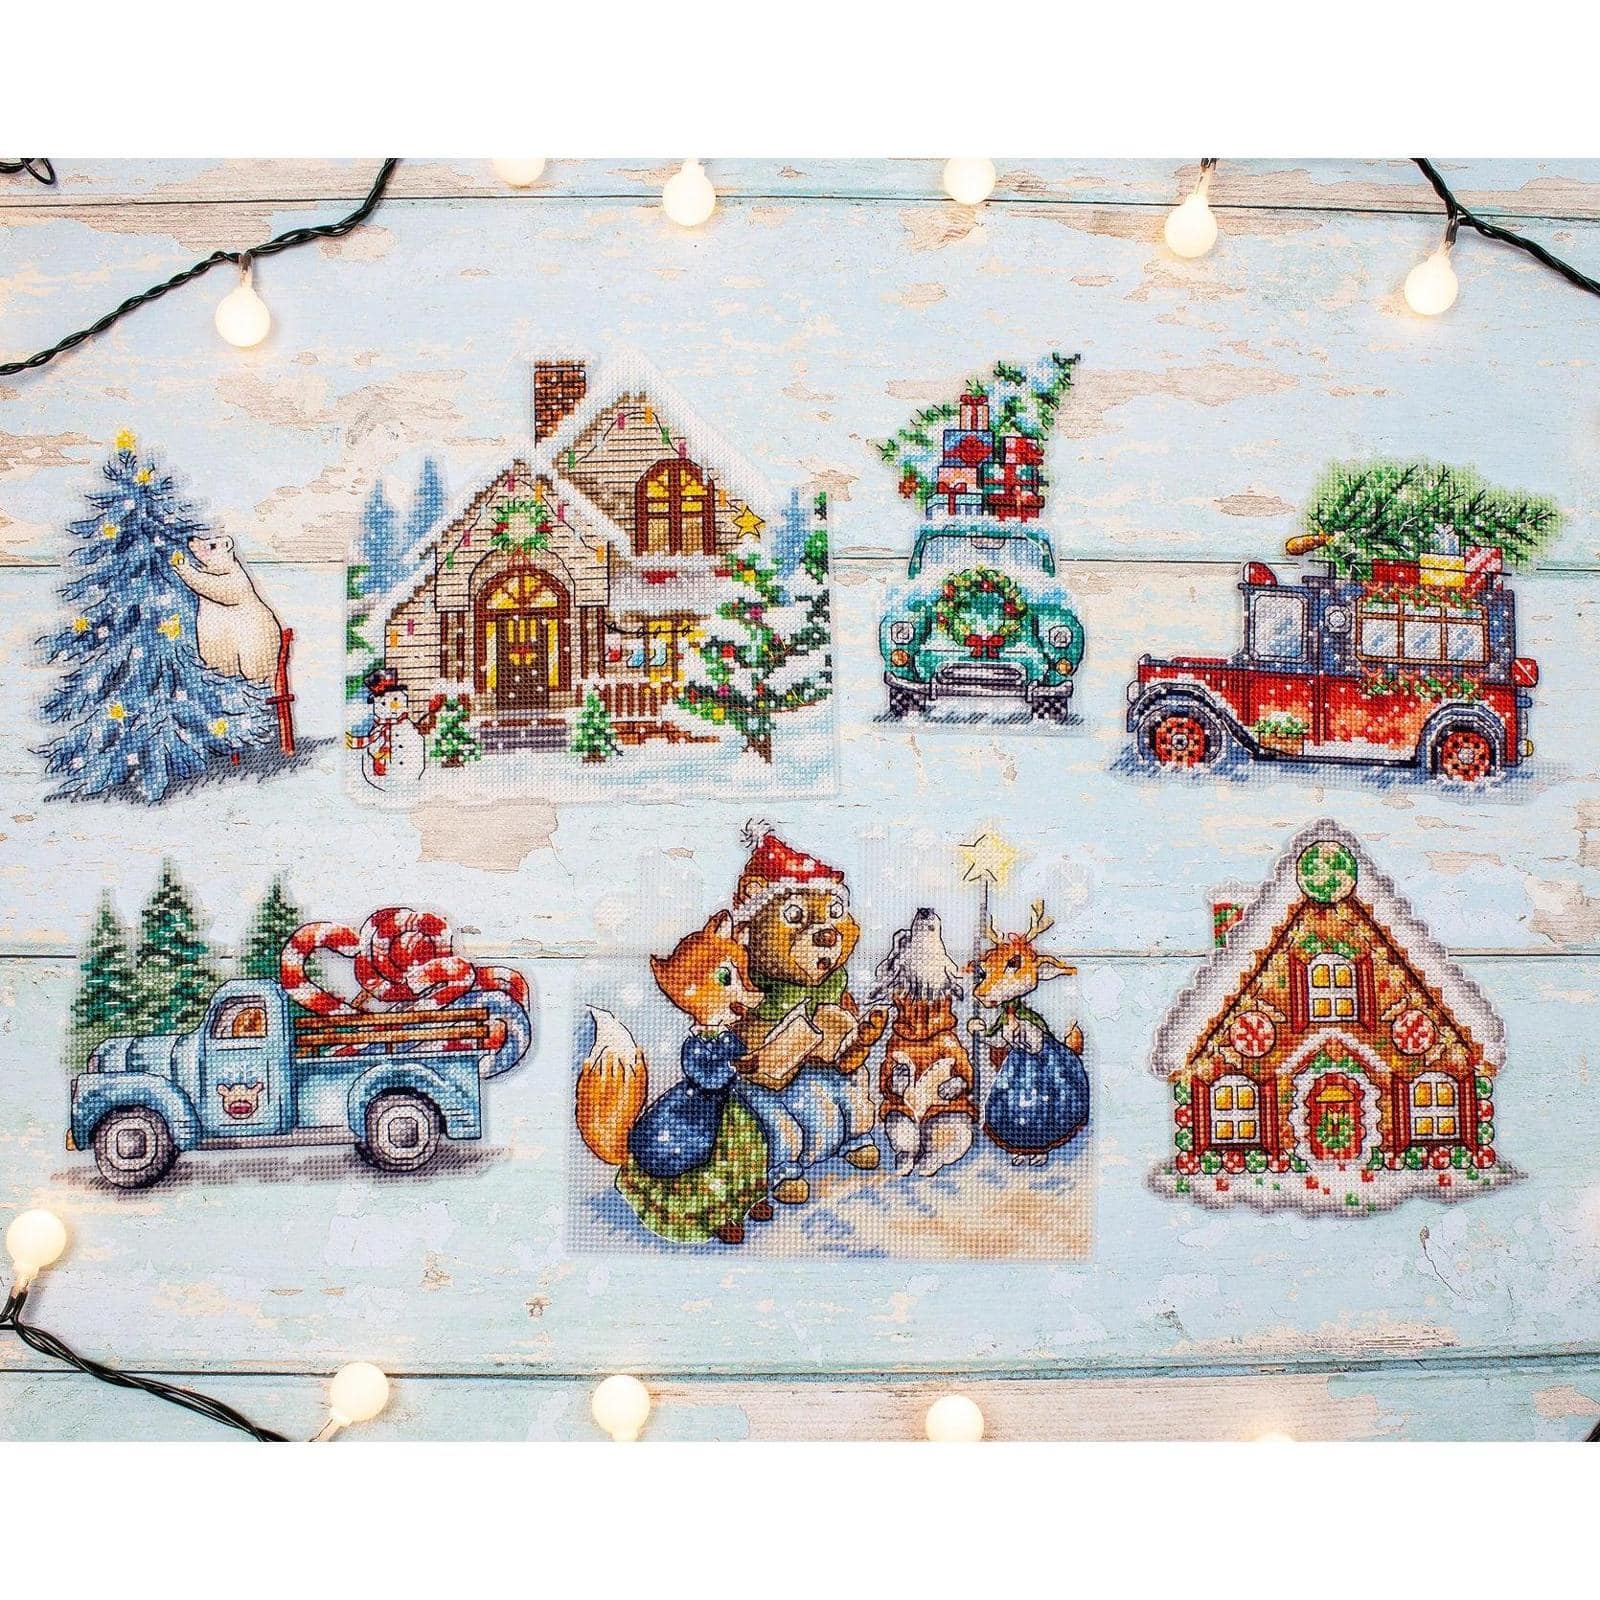 Letistitch Christmas Ornaments Counted Cross Stitch Kit